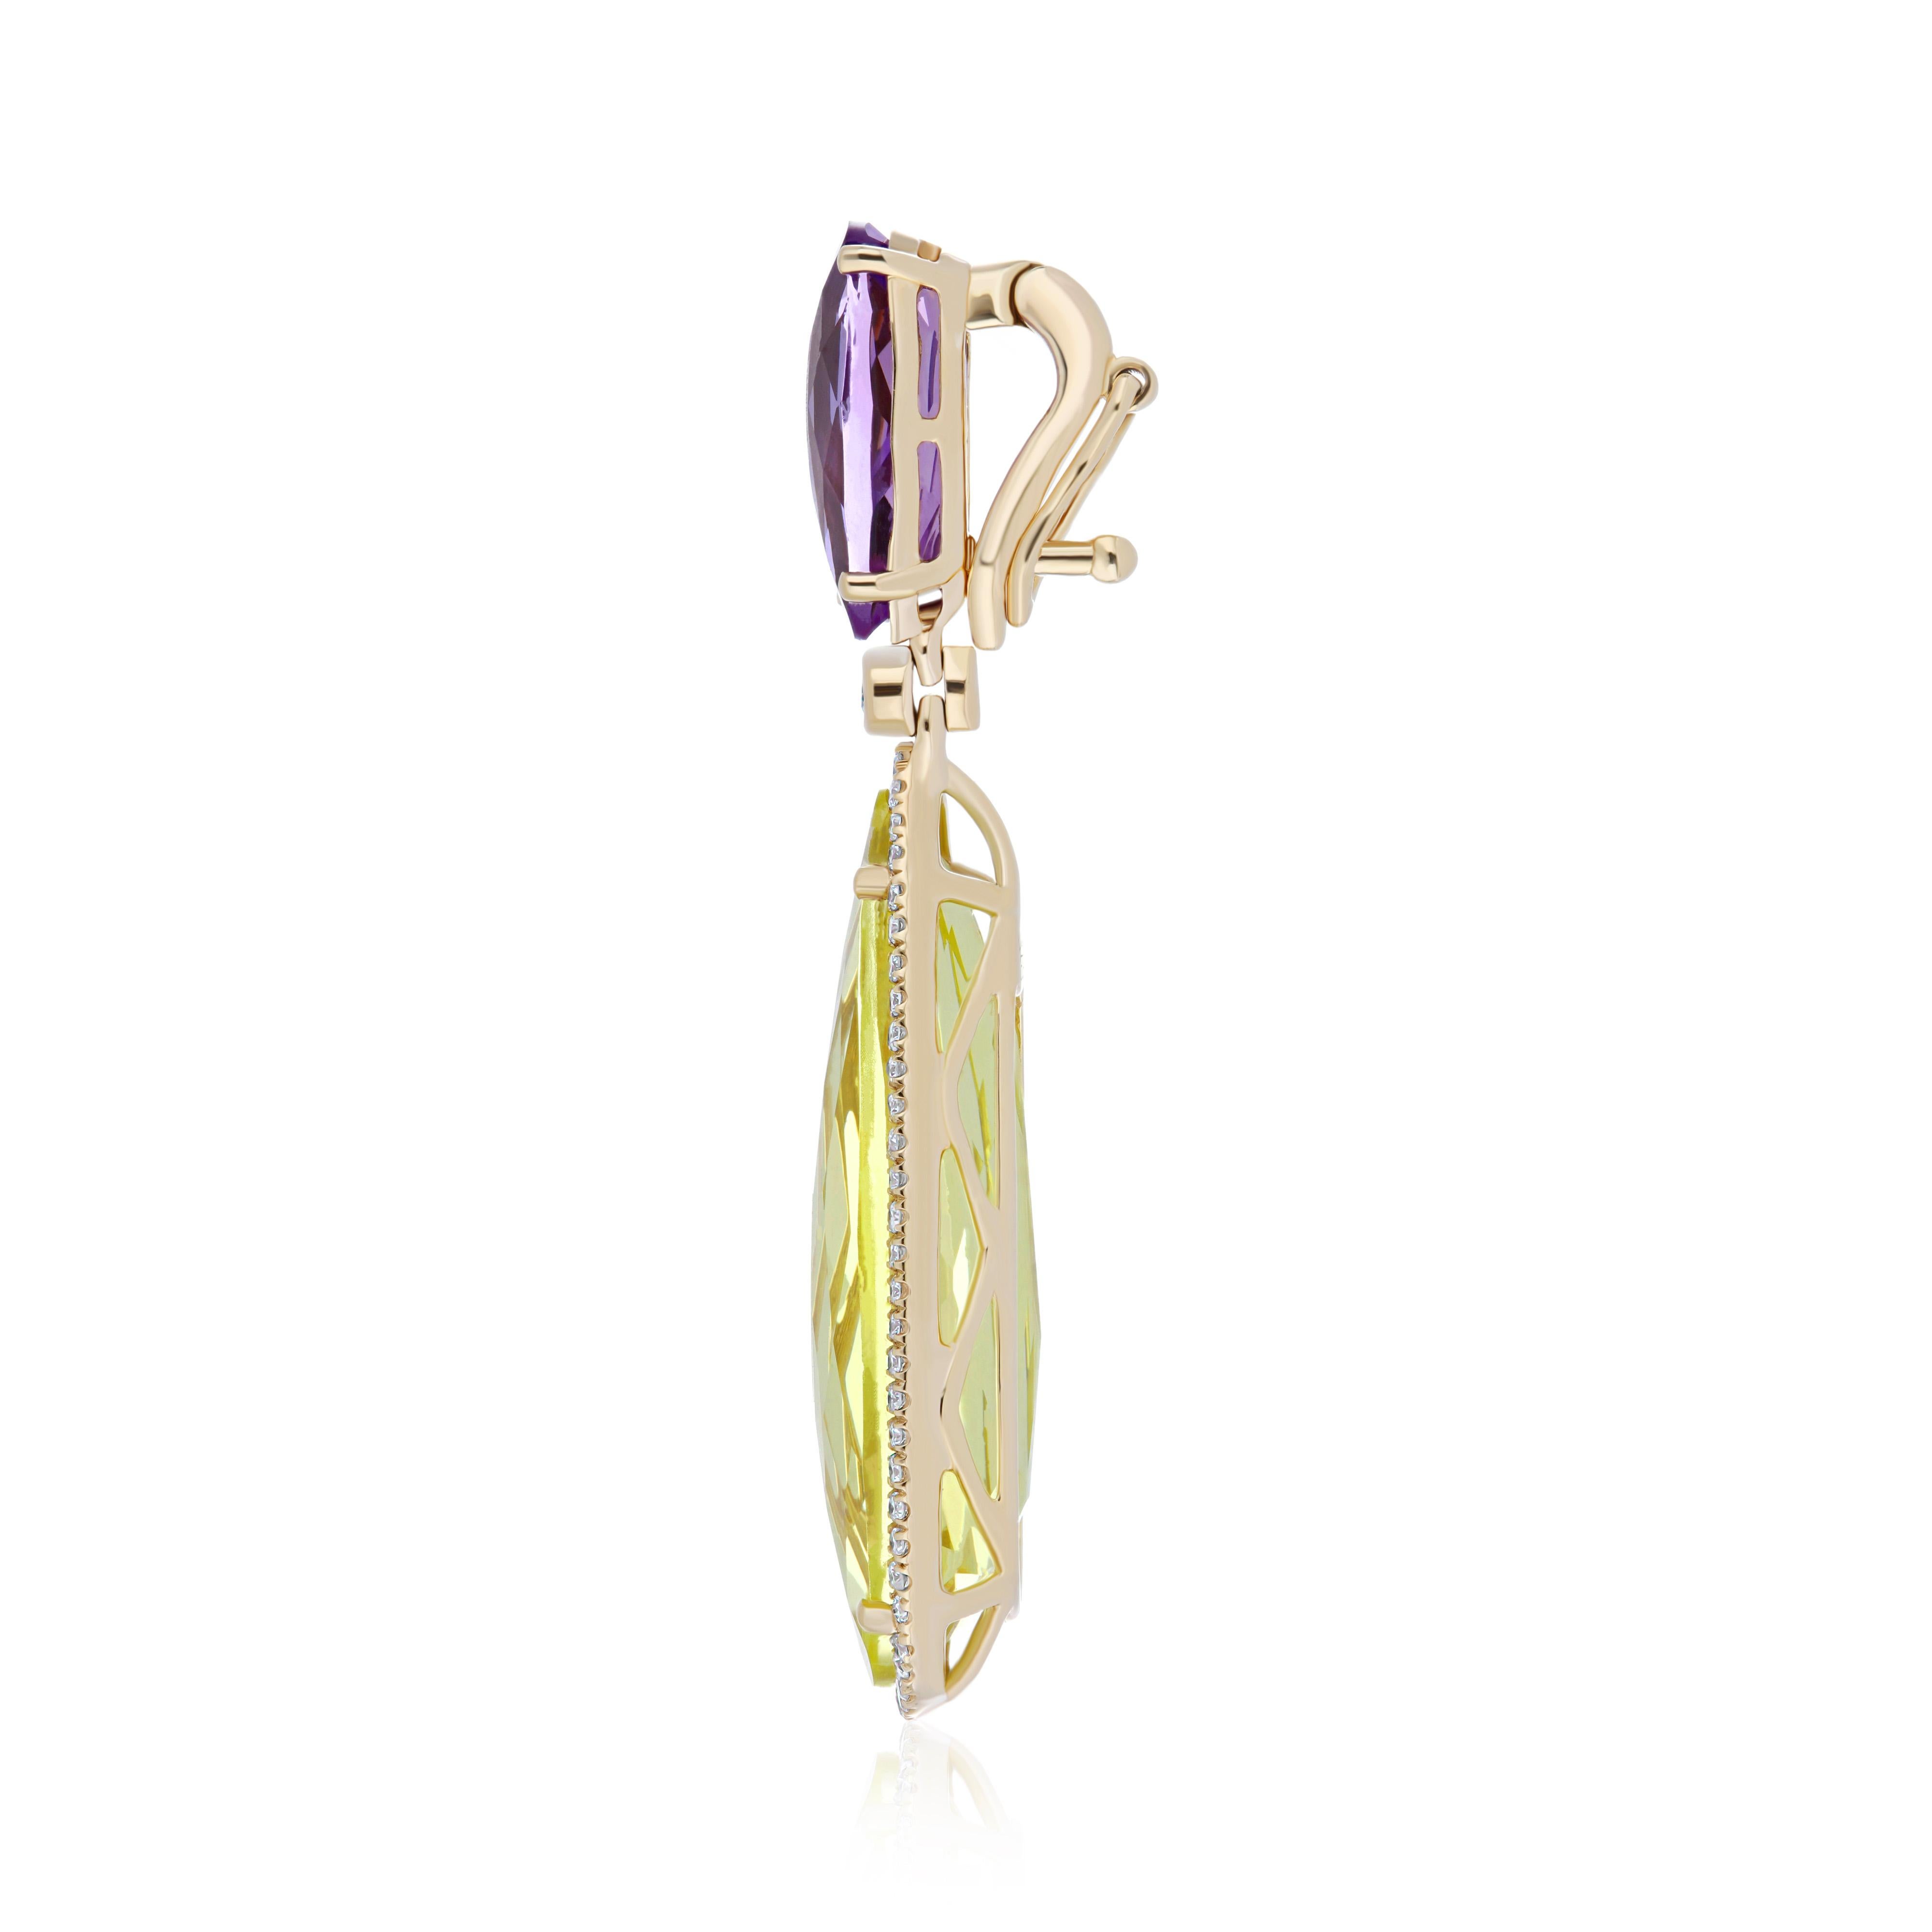 Elegant and Exquisitely Detailed 14Karat Yellow Gold Pendant in Fancy Shape Lemon Citrine weighing approx. 9.82Cts, set in contrast with 1.90Cts Amethyst in Fancy Shape  and micro pave Set Diamond weighing approx. 0.25Cts Beautifully Hand-Crafted